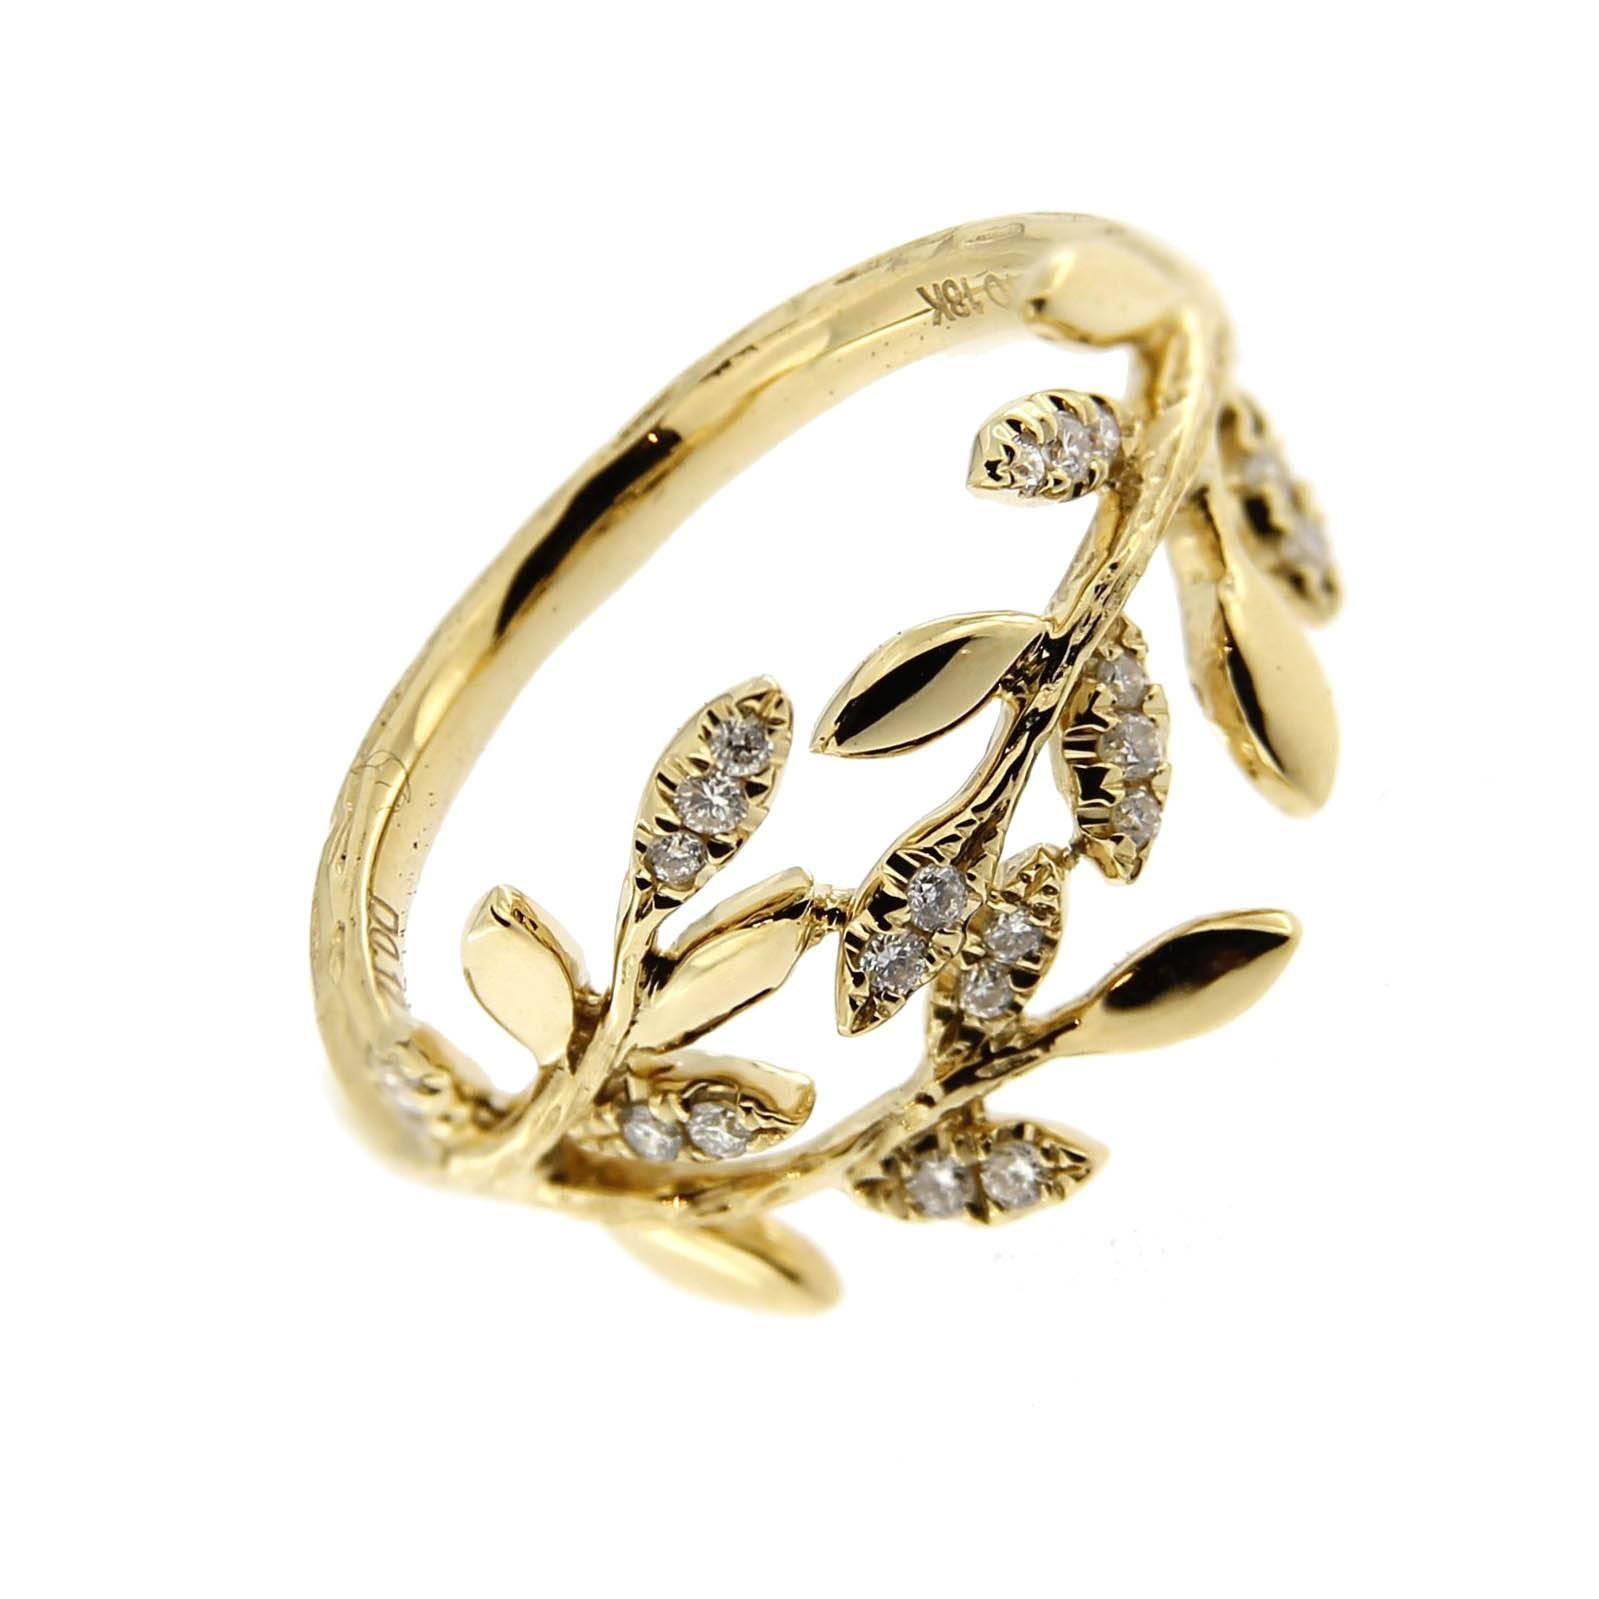 Jona design collection, hand crafted in Italy, 18 karat yellow gold foliage ring, set with 0.13 carats of white diamonds. Size US 6.5 can be sized to any specification.
Also available in rose gold and white gold. 
All Jona jewelry is new and has